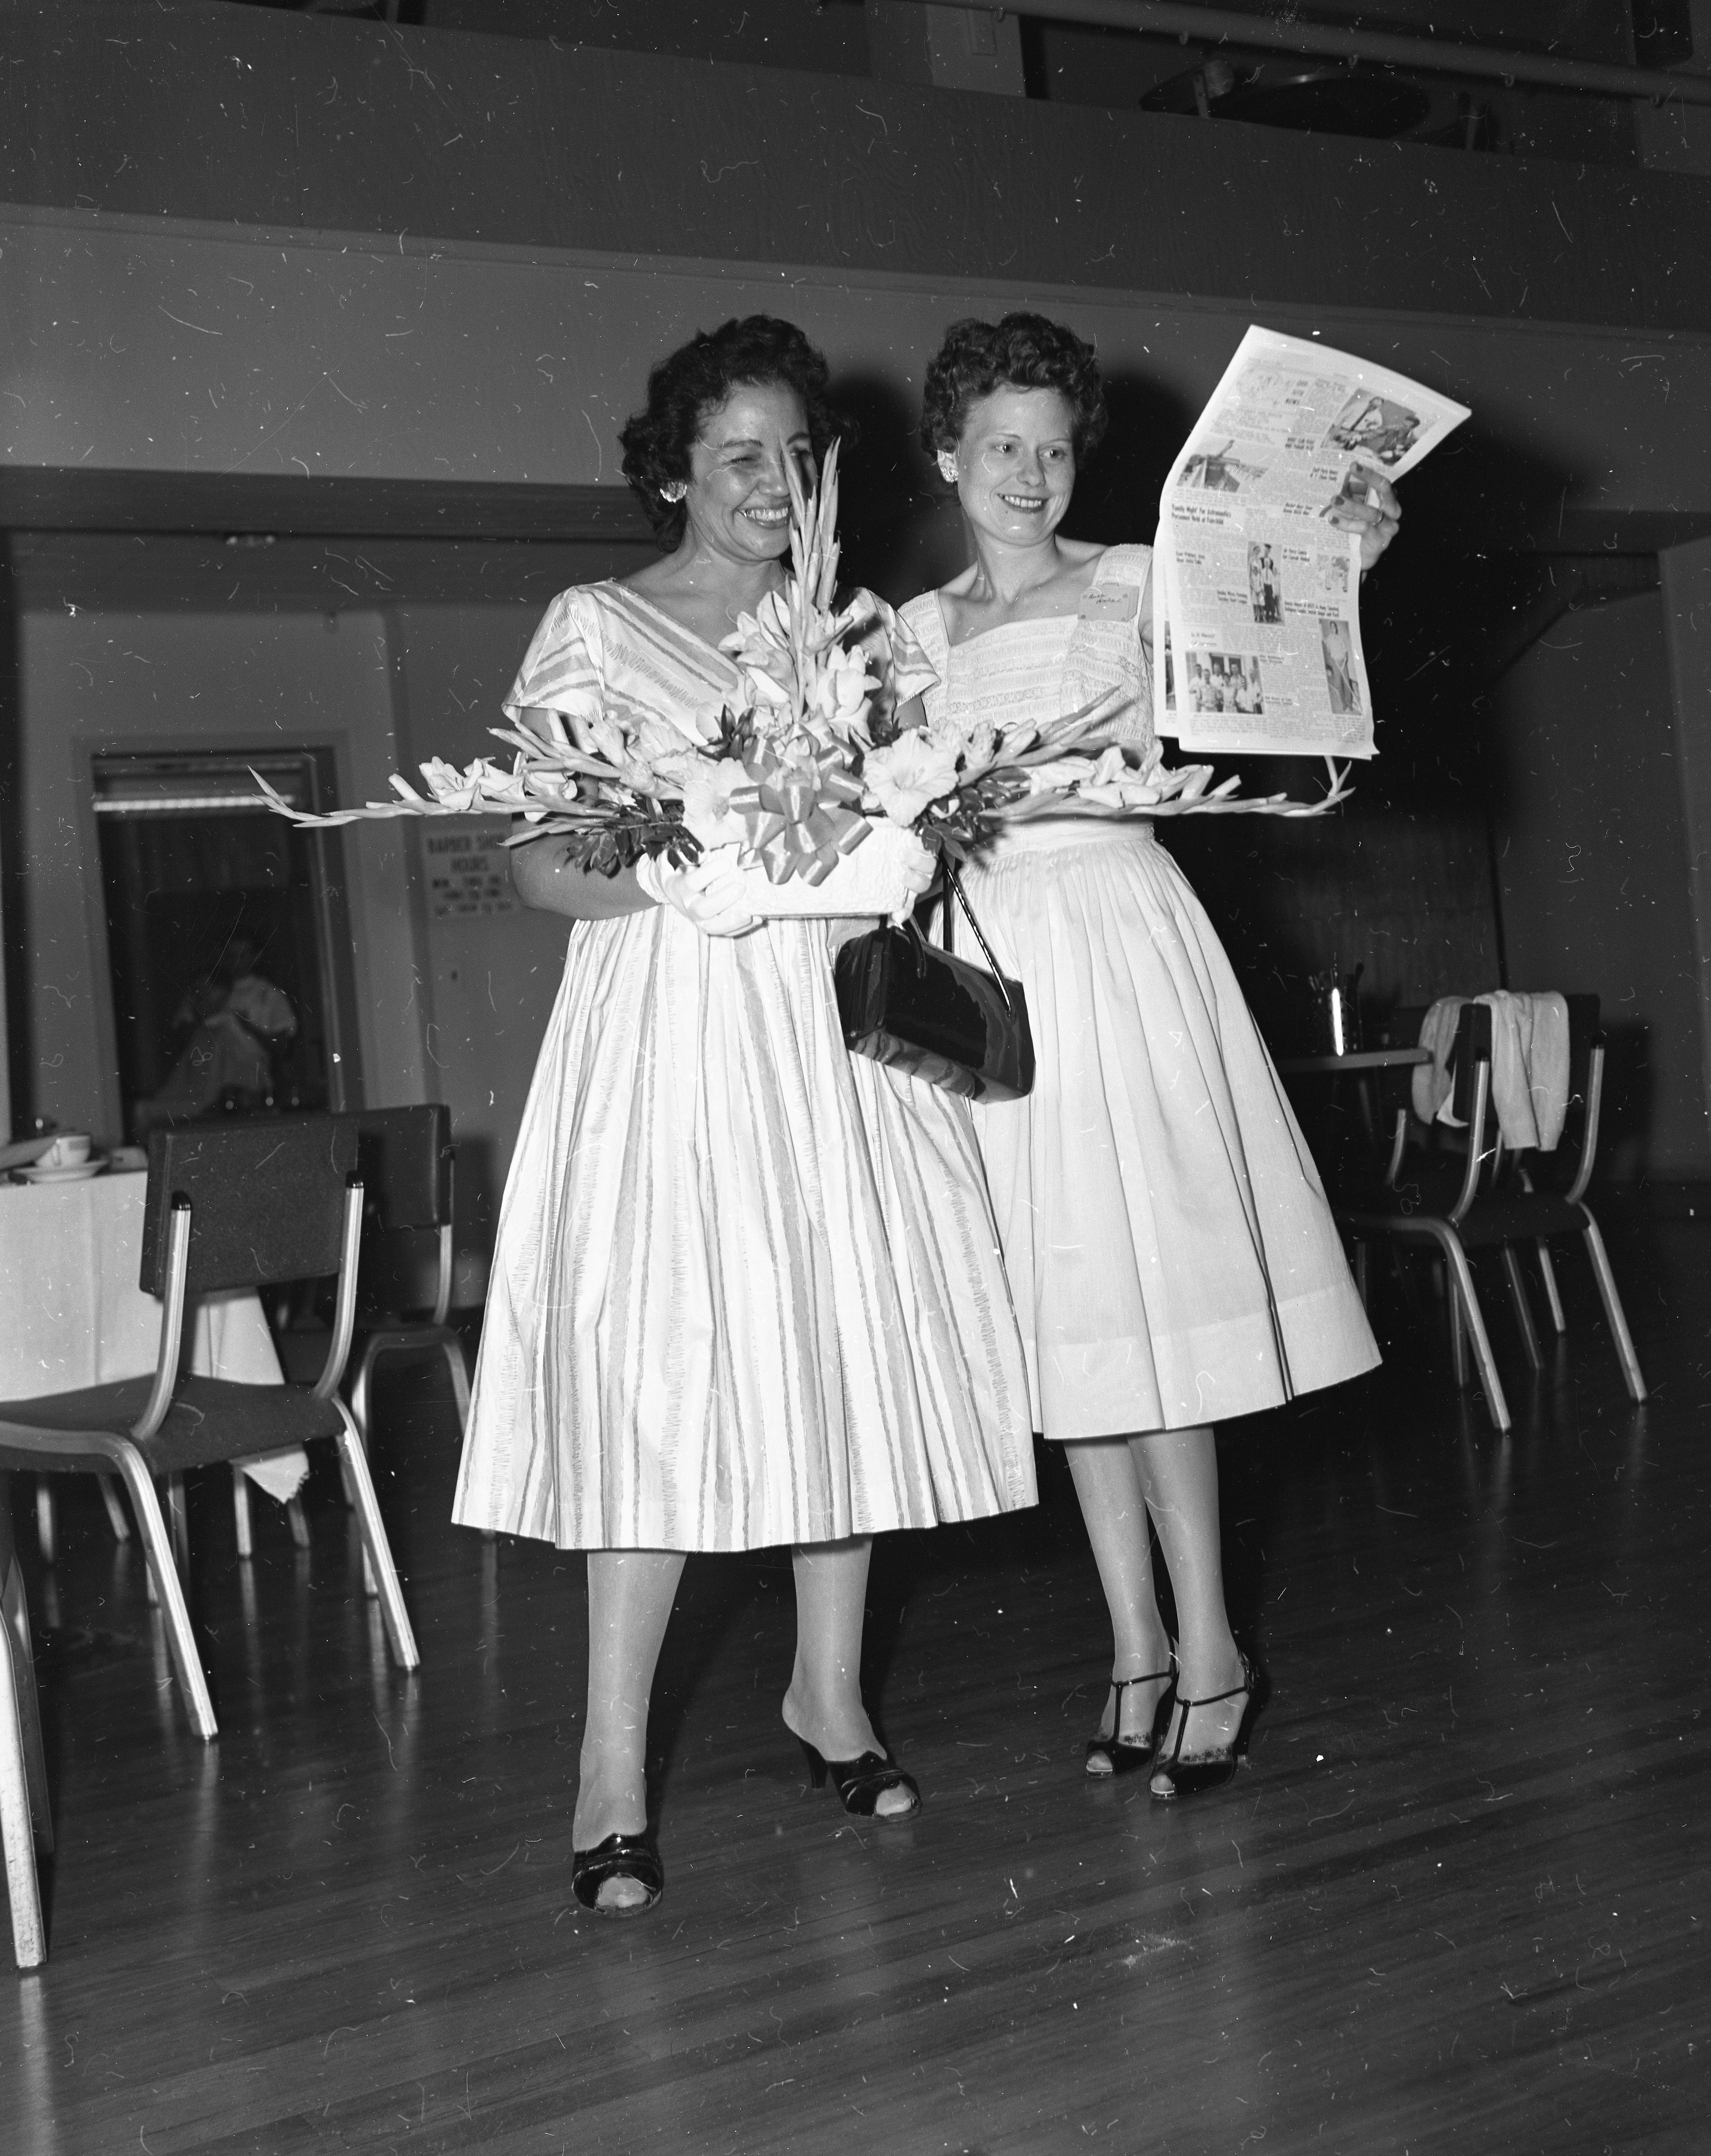 One woman holding gift while the other holds an issue of the Convairiety magazine. 